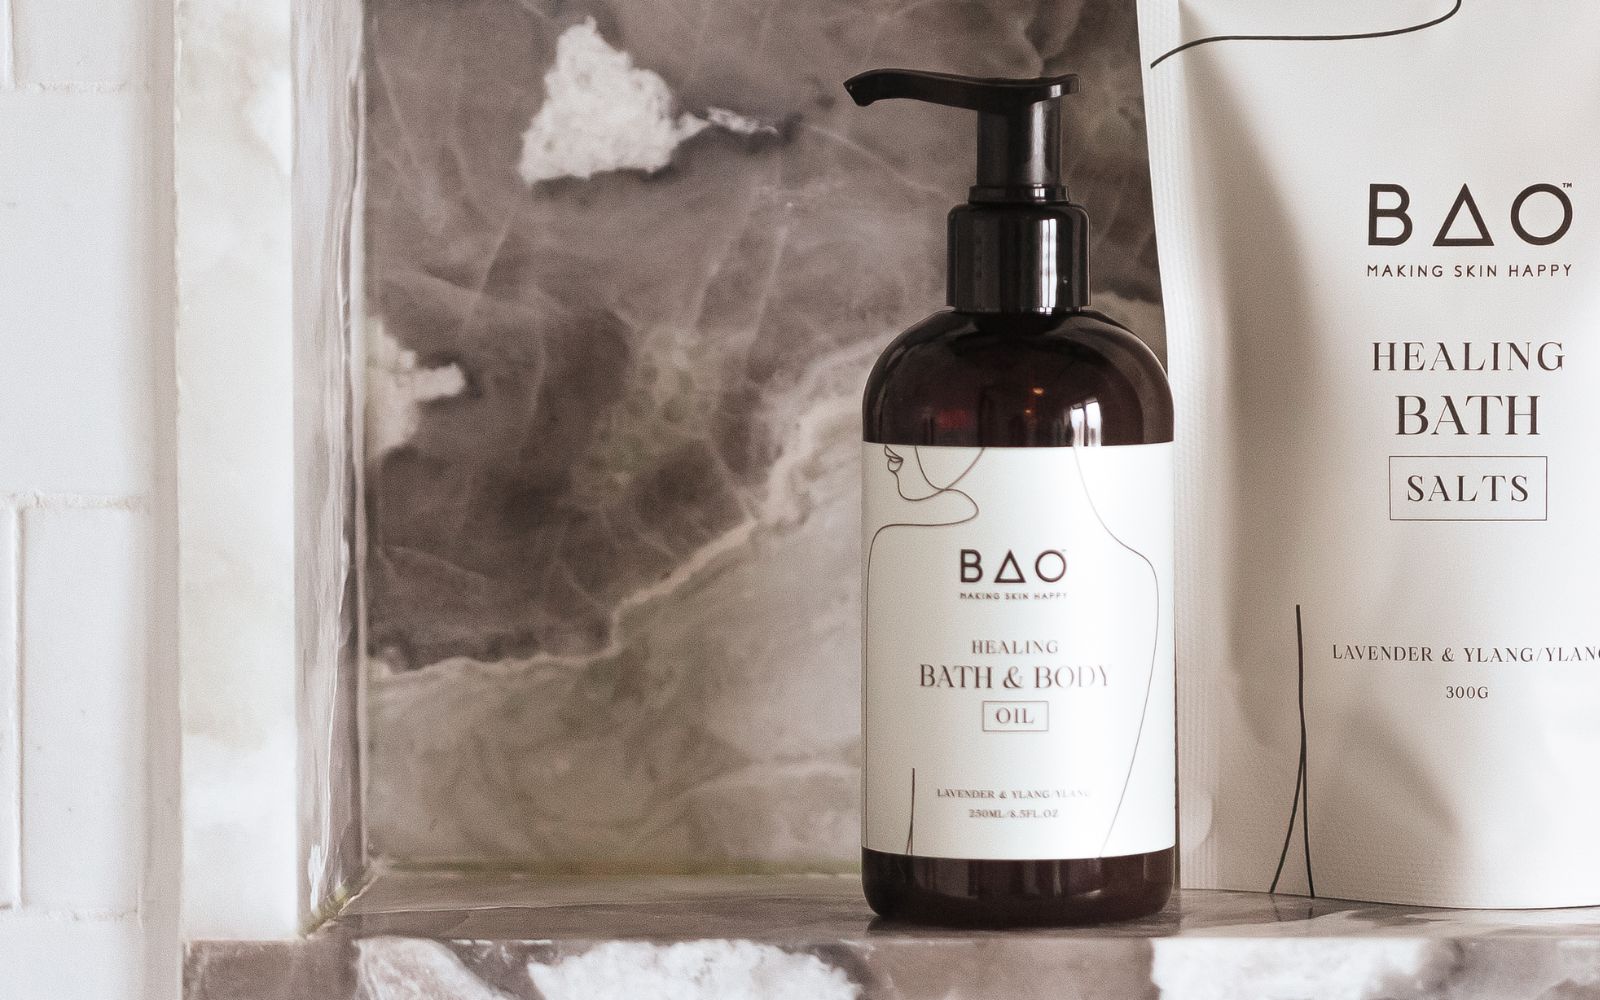 BAO bath and body oil and bath salts in a shower